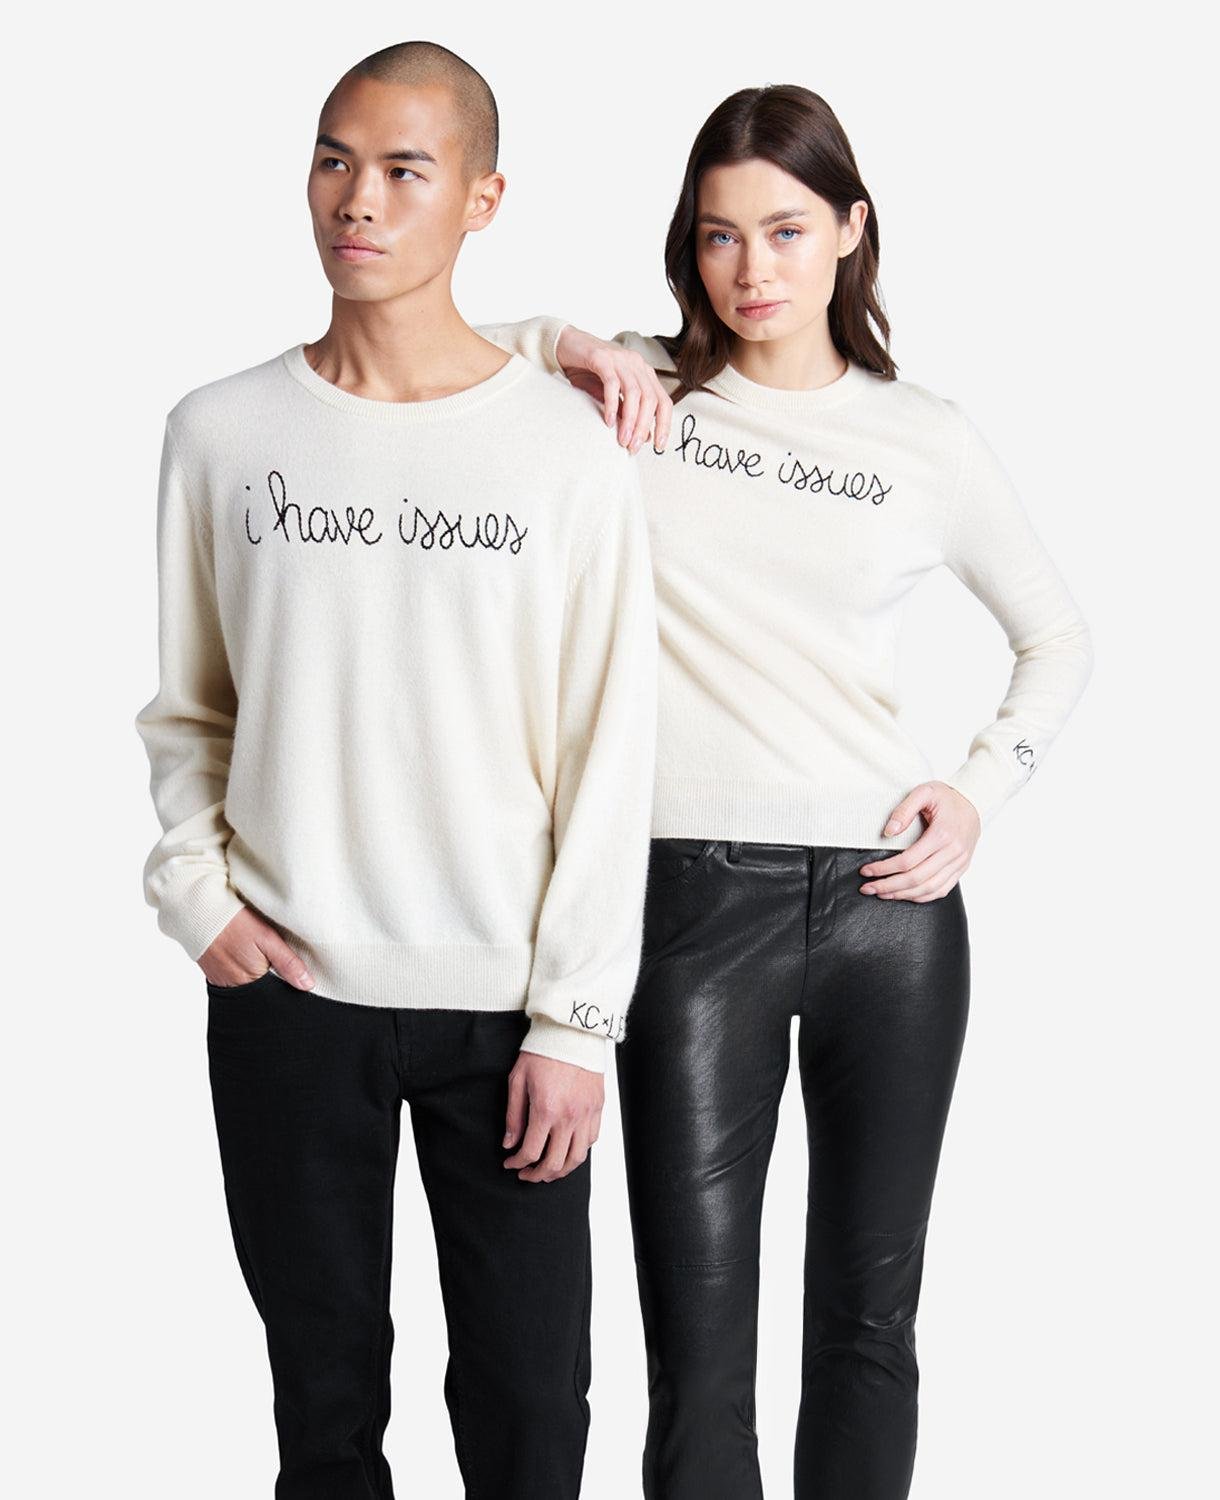 Kenneth Cole | Lingua Franca I Have Issues Cashmere Sweater by KENNETH COLE